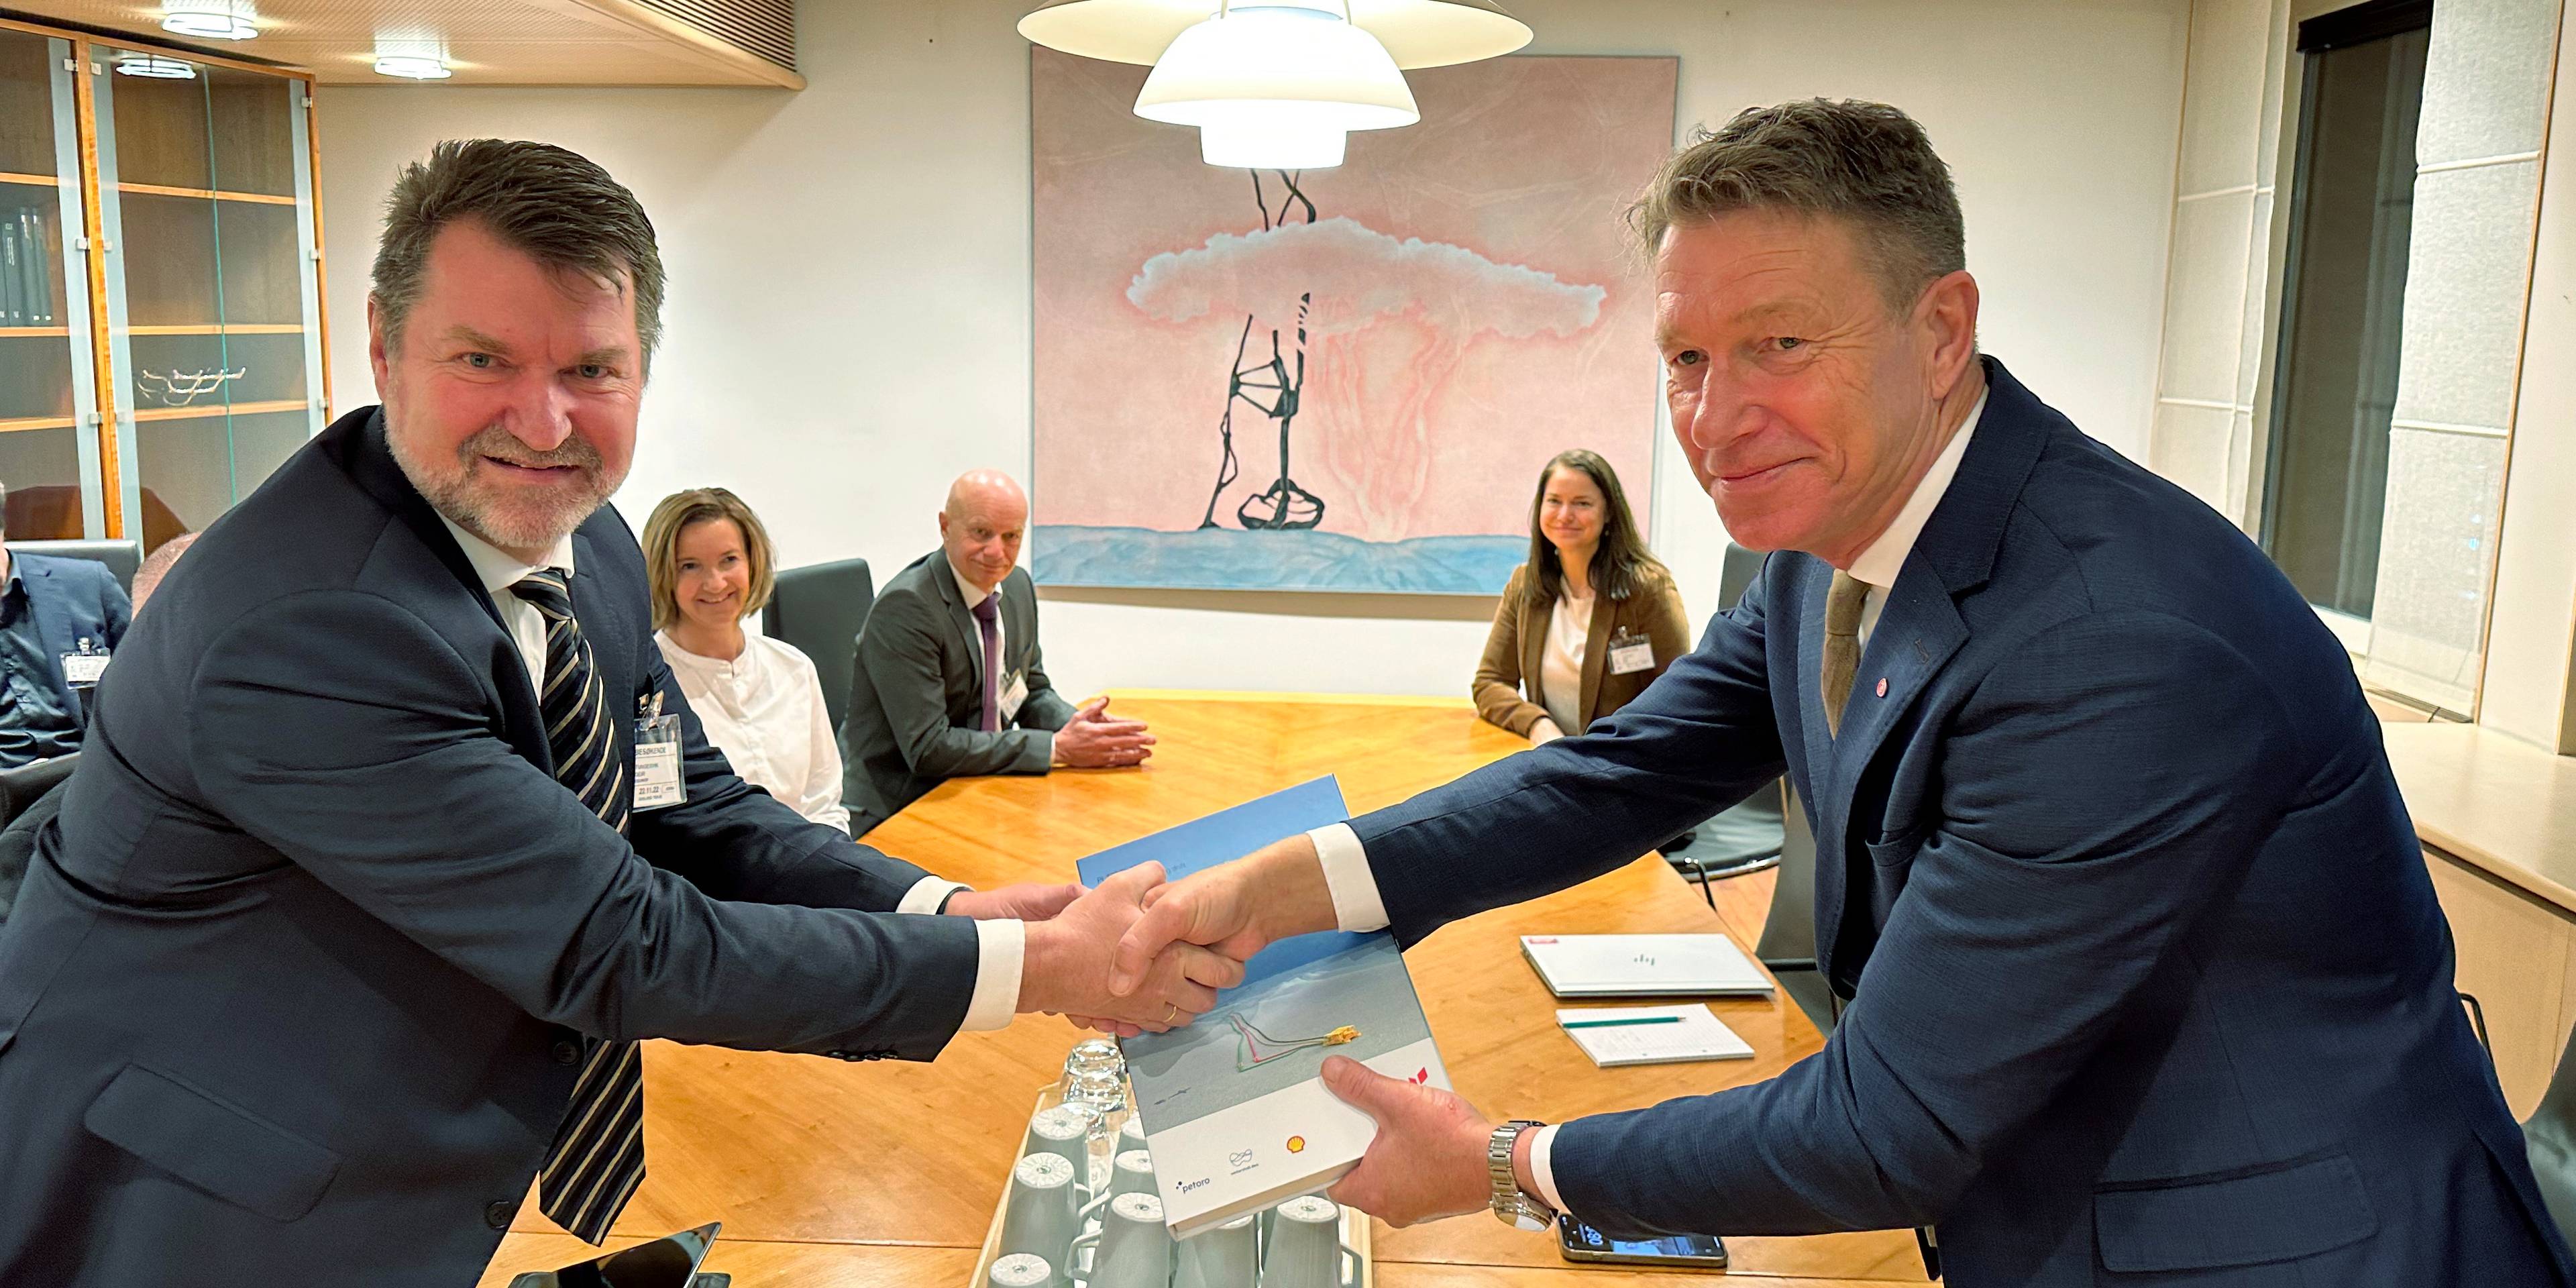 Geir Tungesvik (left) presented the PDO to the Minister for Oil & Energy, Terje Aasland.